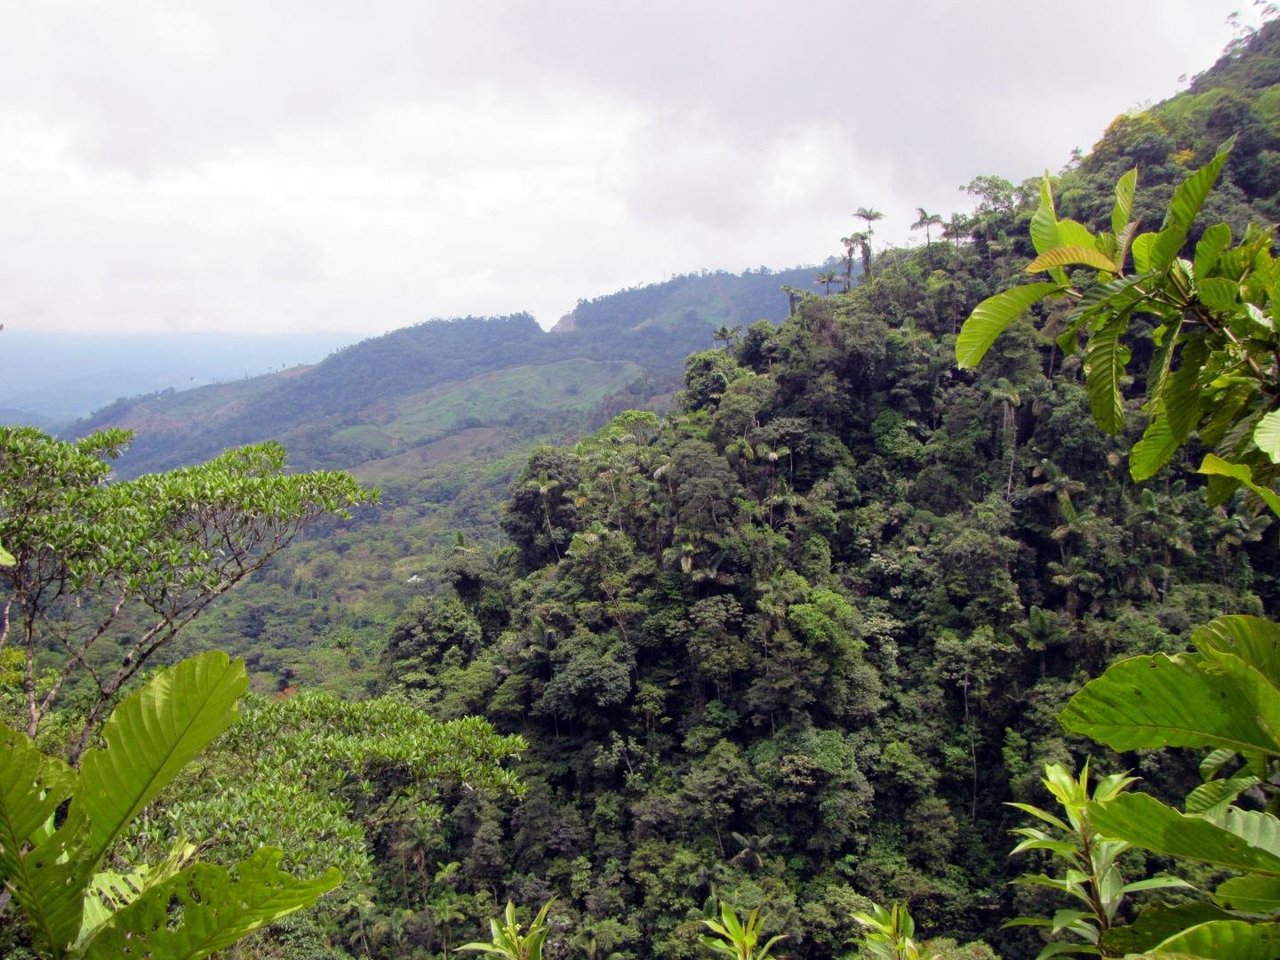 The Rainforests of Colombia